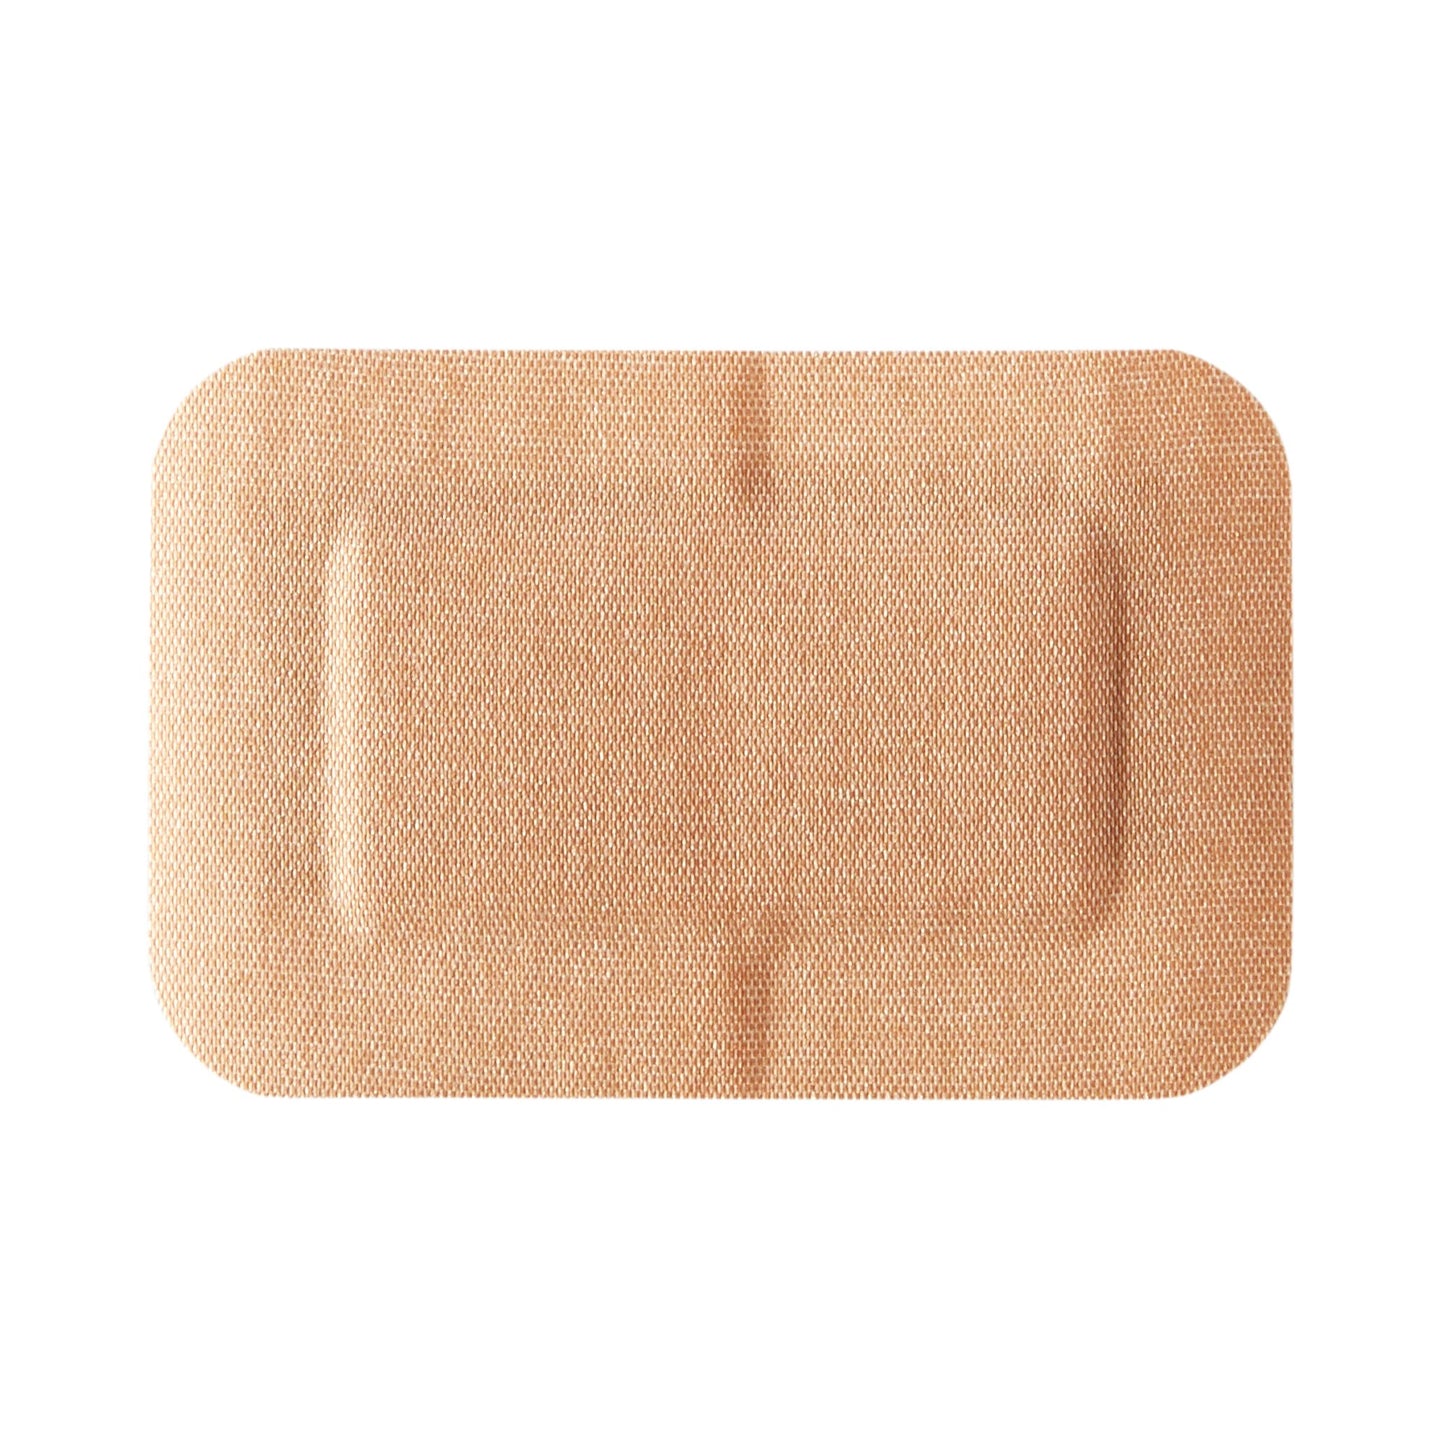 McKesson Tan Adhesive Bandage Patches, 2 x 3 in., 50 ct.